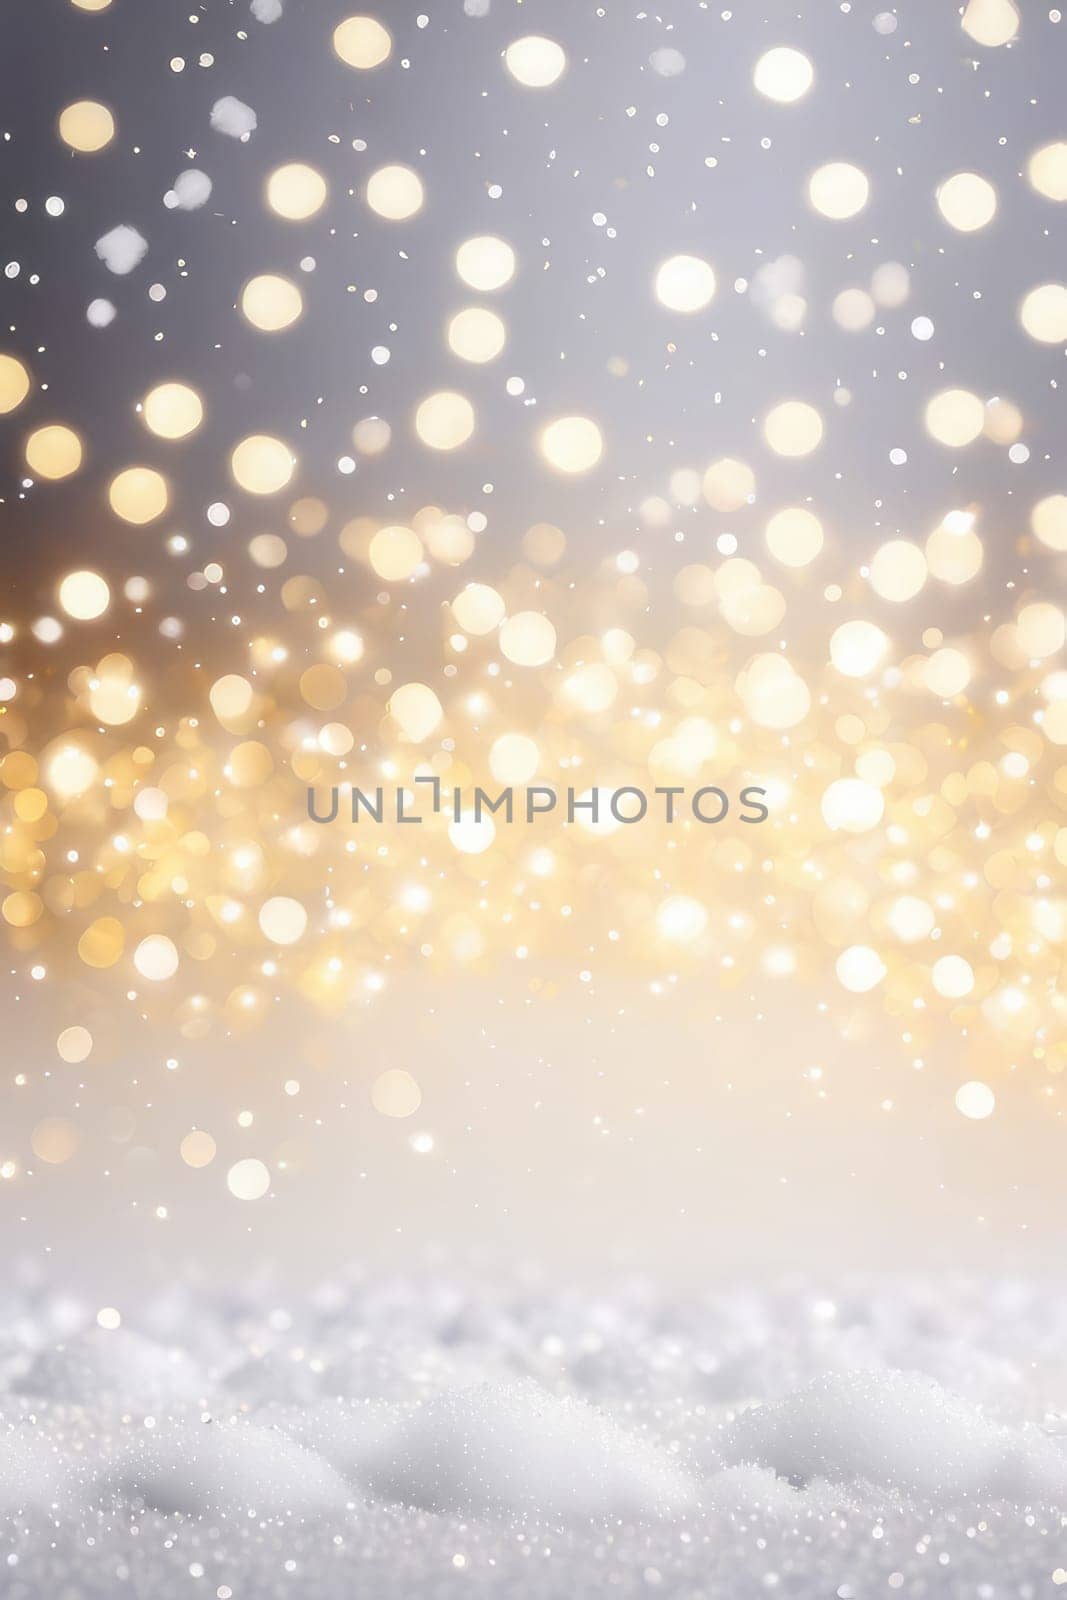 Snowy realistic background with bokeh, winter holiday concept